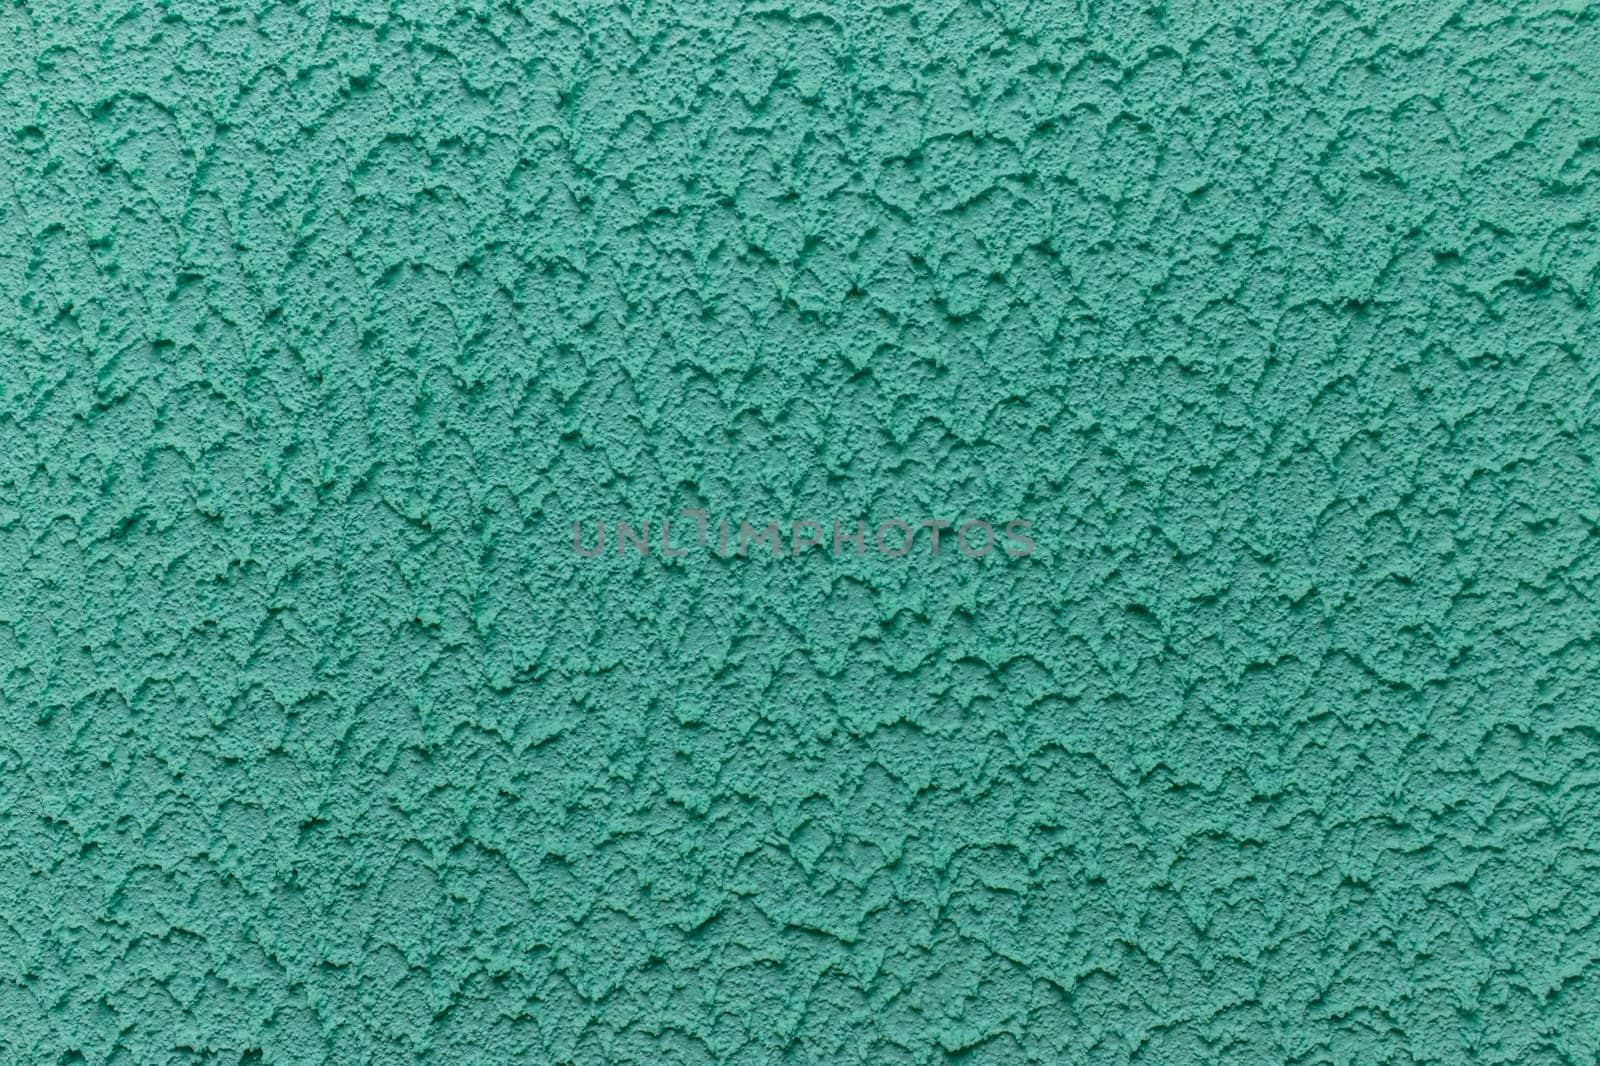 Green aquamarine turquoise azure plaster wall abstract pattern texture coarse surface background rough stucco by AYDO8